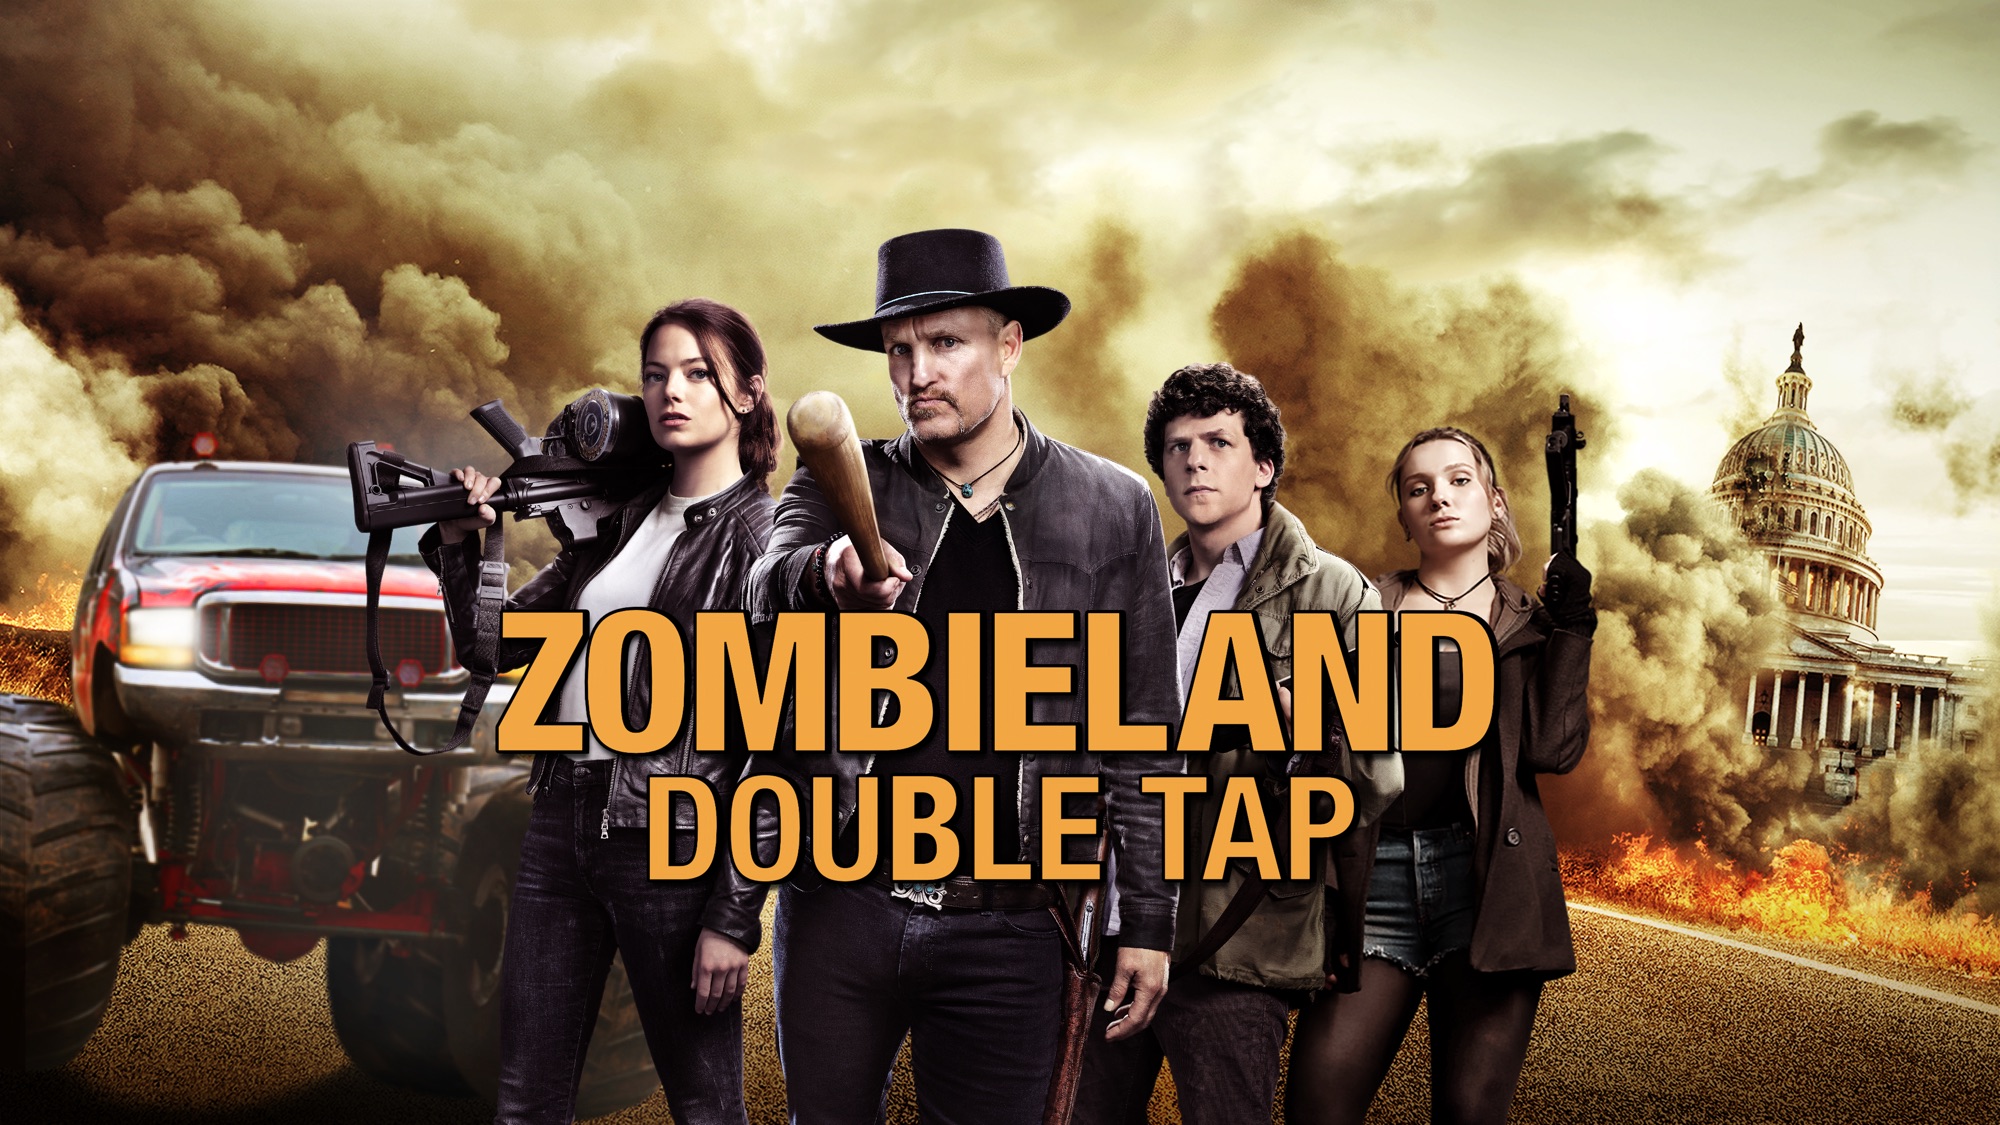 Movie Zombieland: Double Tap HD Wallpaper Background Image. 